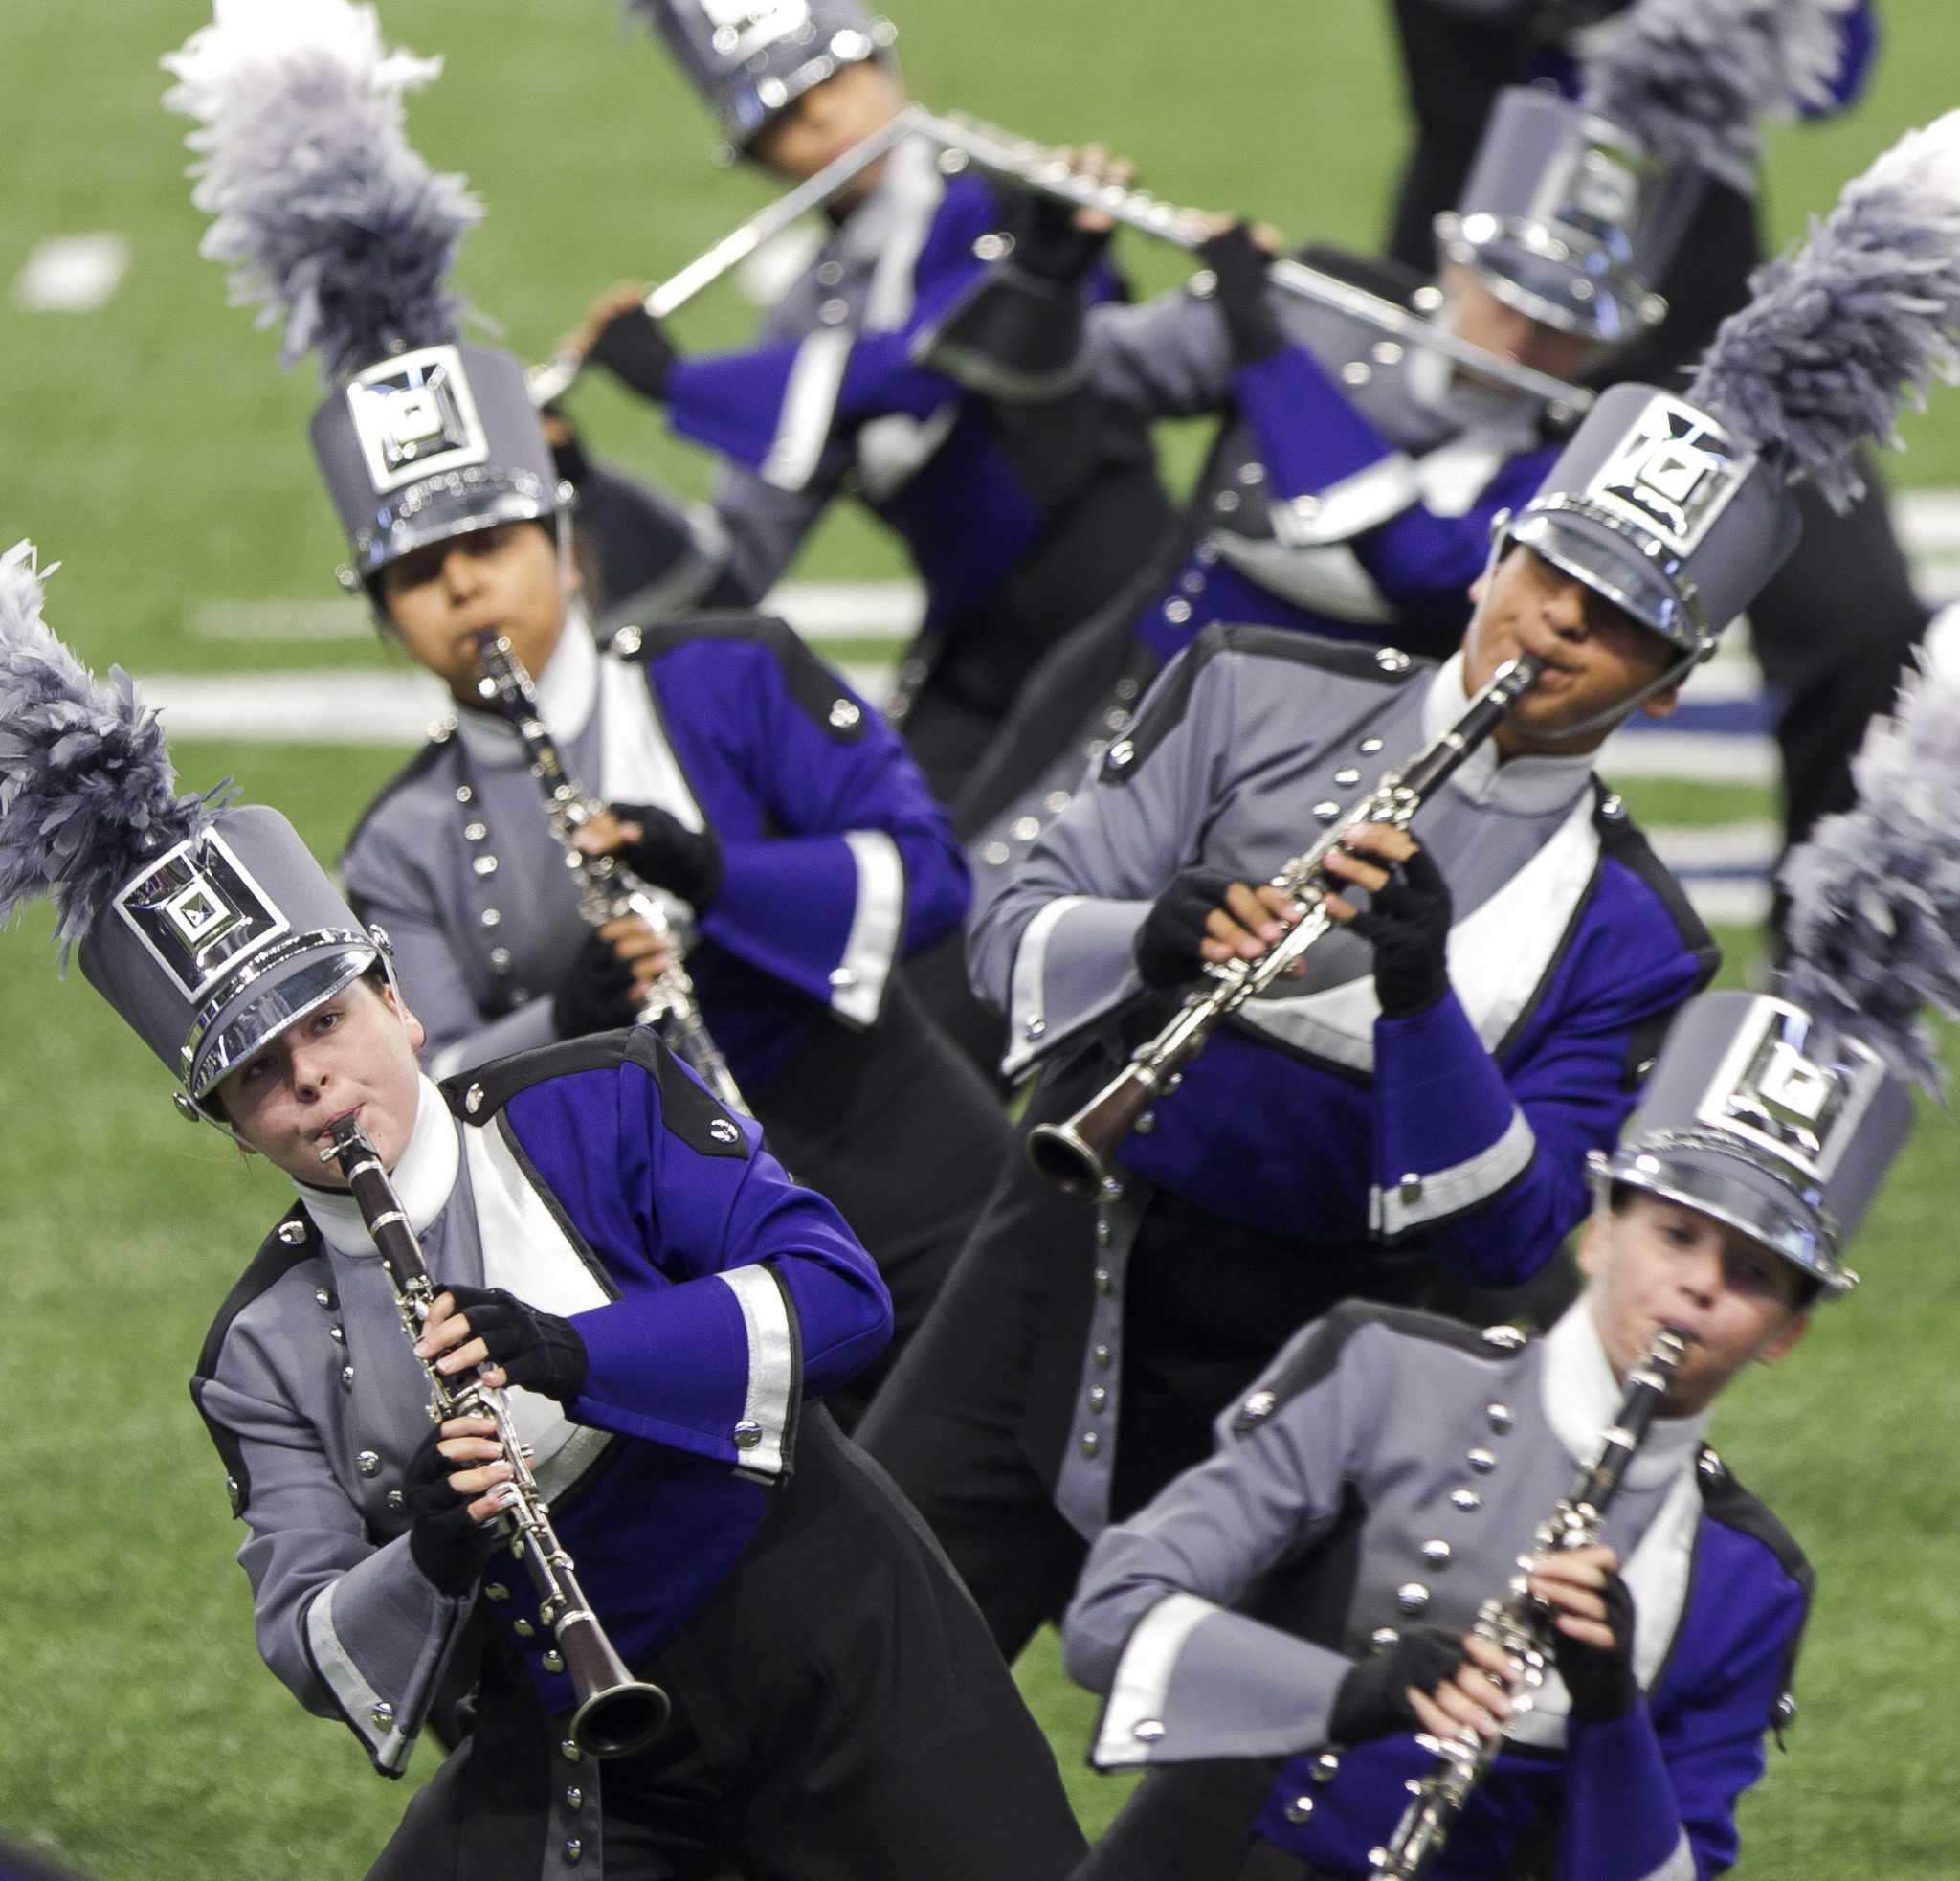 High School  band  performances evolving at state competition